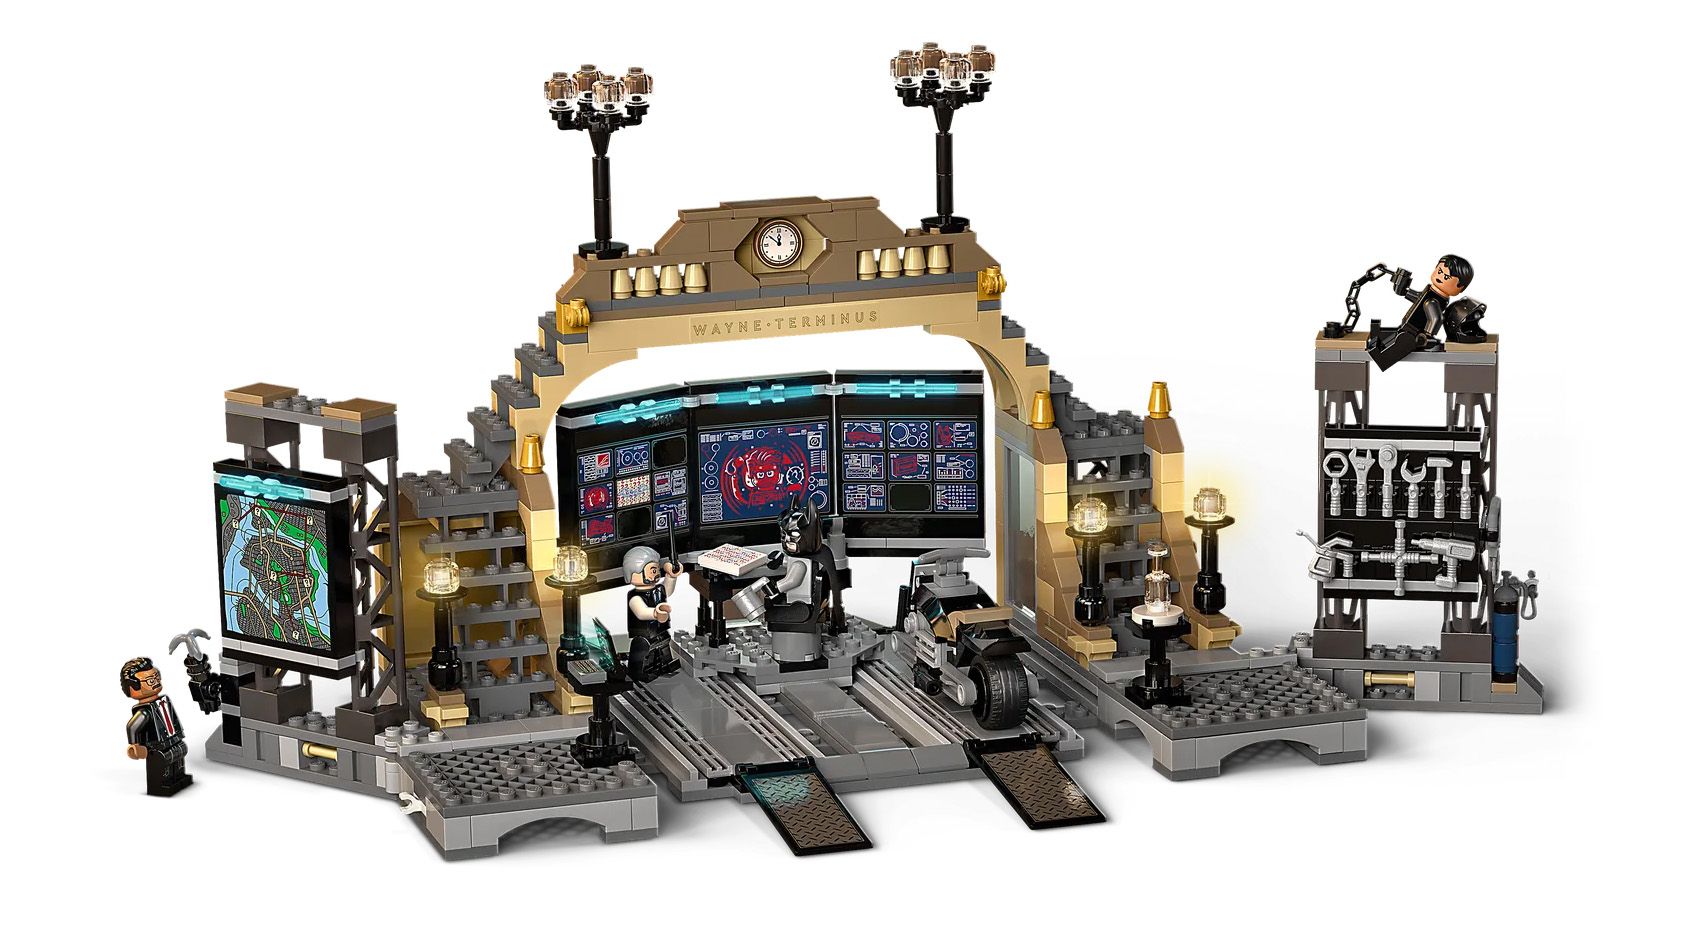 The Batman New Look At Penguin Chase Revealed In LEGO Set